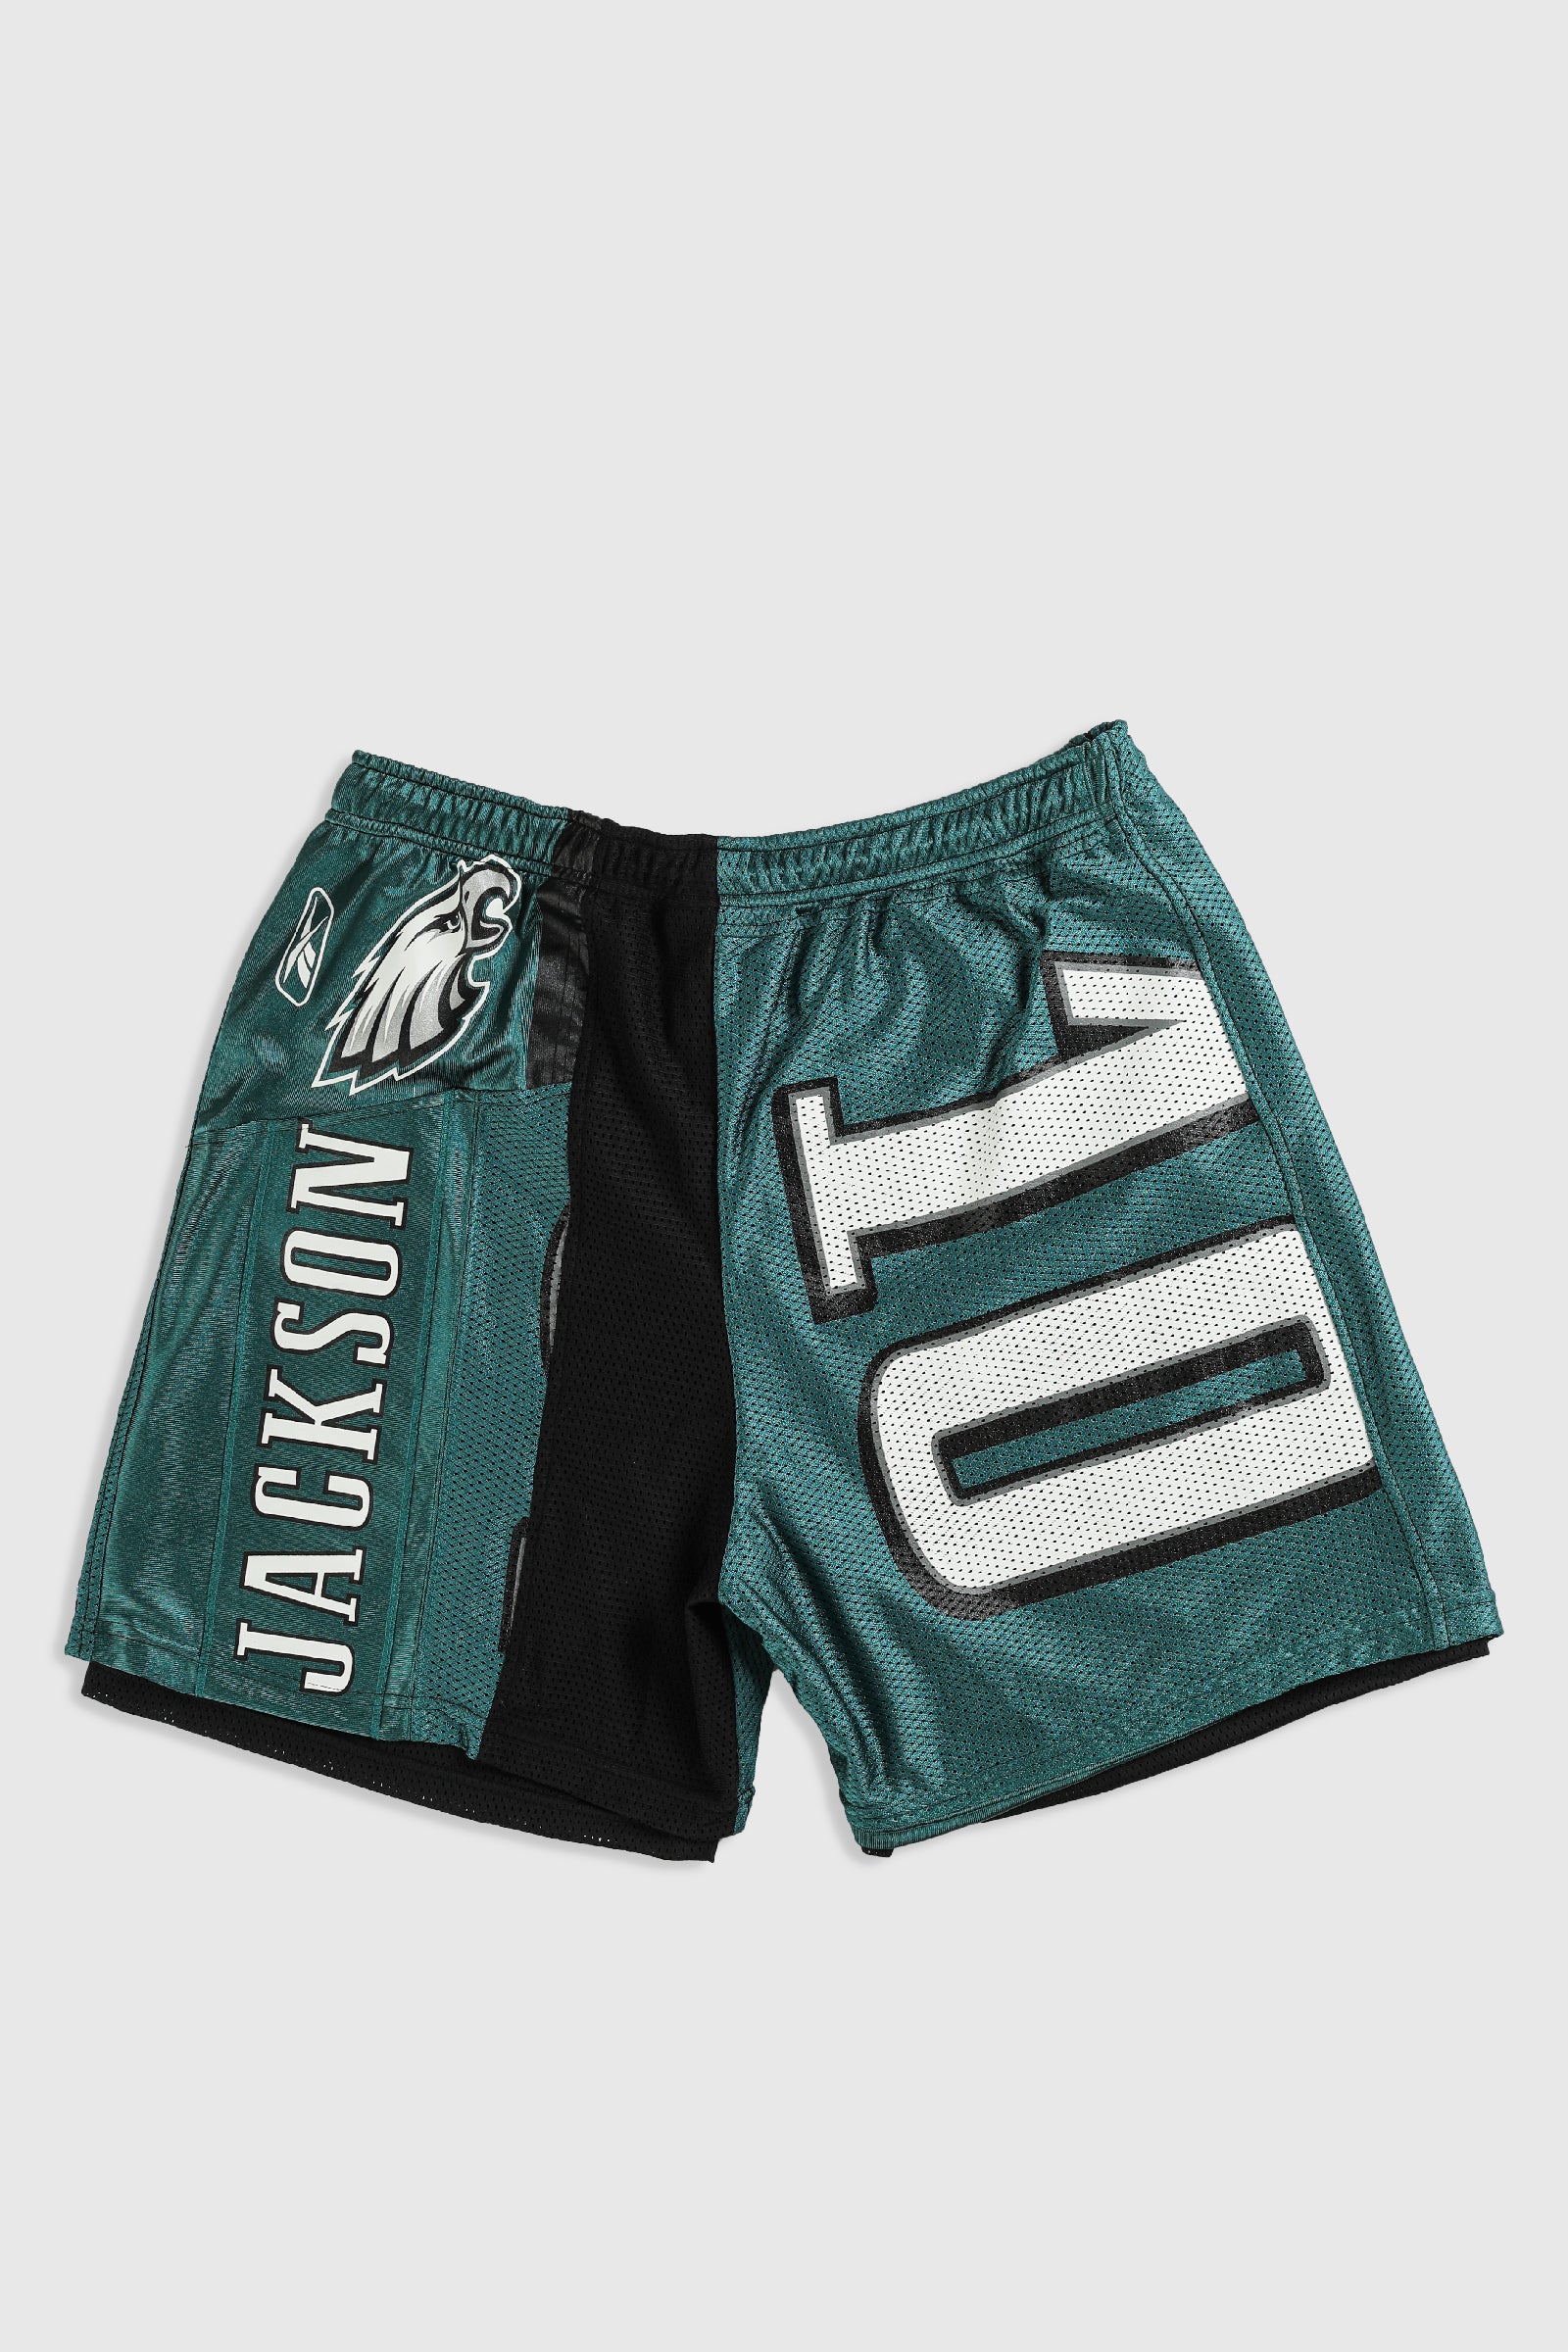 Frankie Collective Rework Hornets Jersey Shorts 002